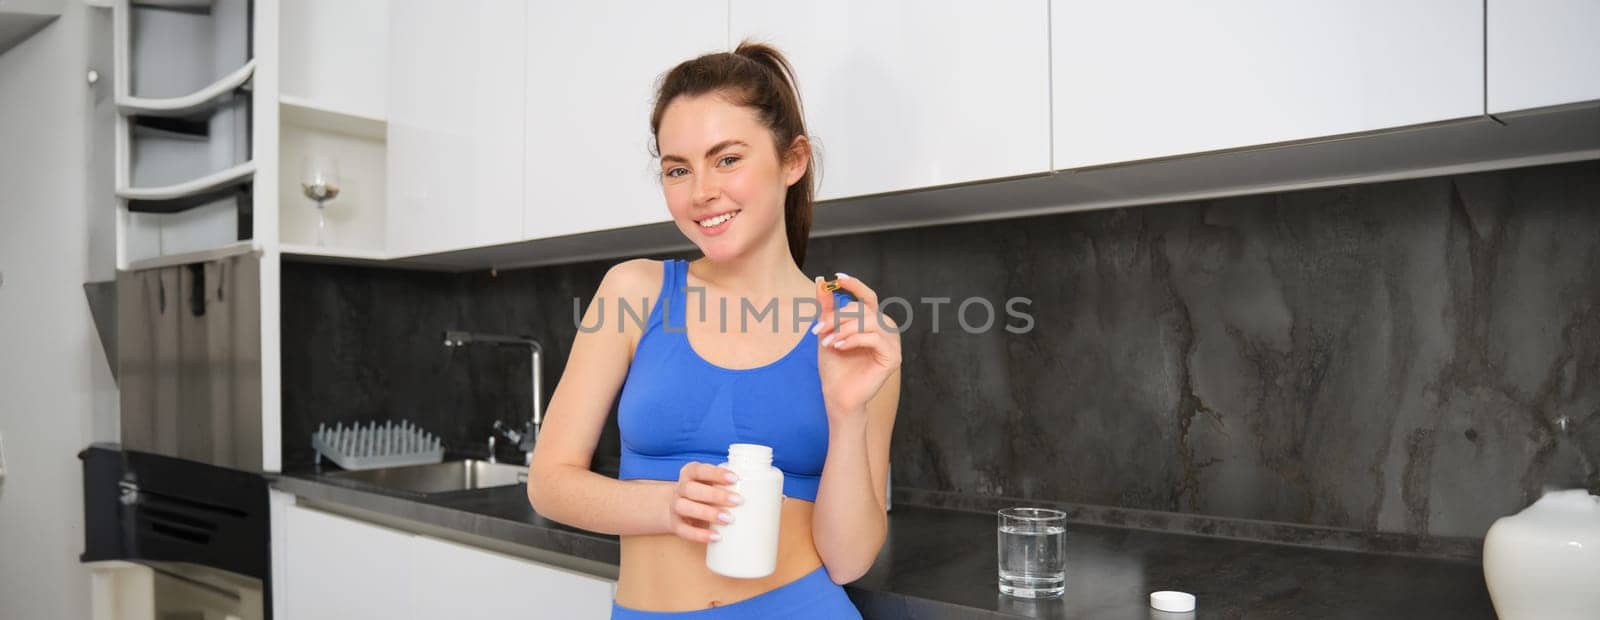 Sport and healthcare. Young woman holding tablets, vitamin c, taking dietary supplements and smiling, leading active and healthy lifestyle, wearing sportswear.